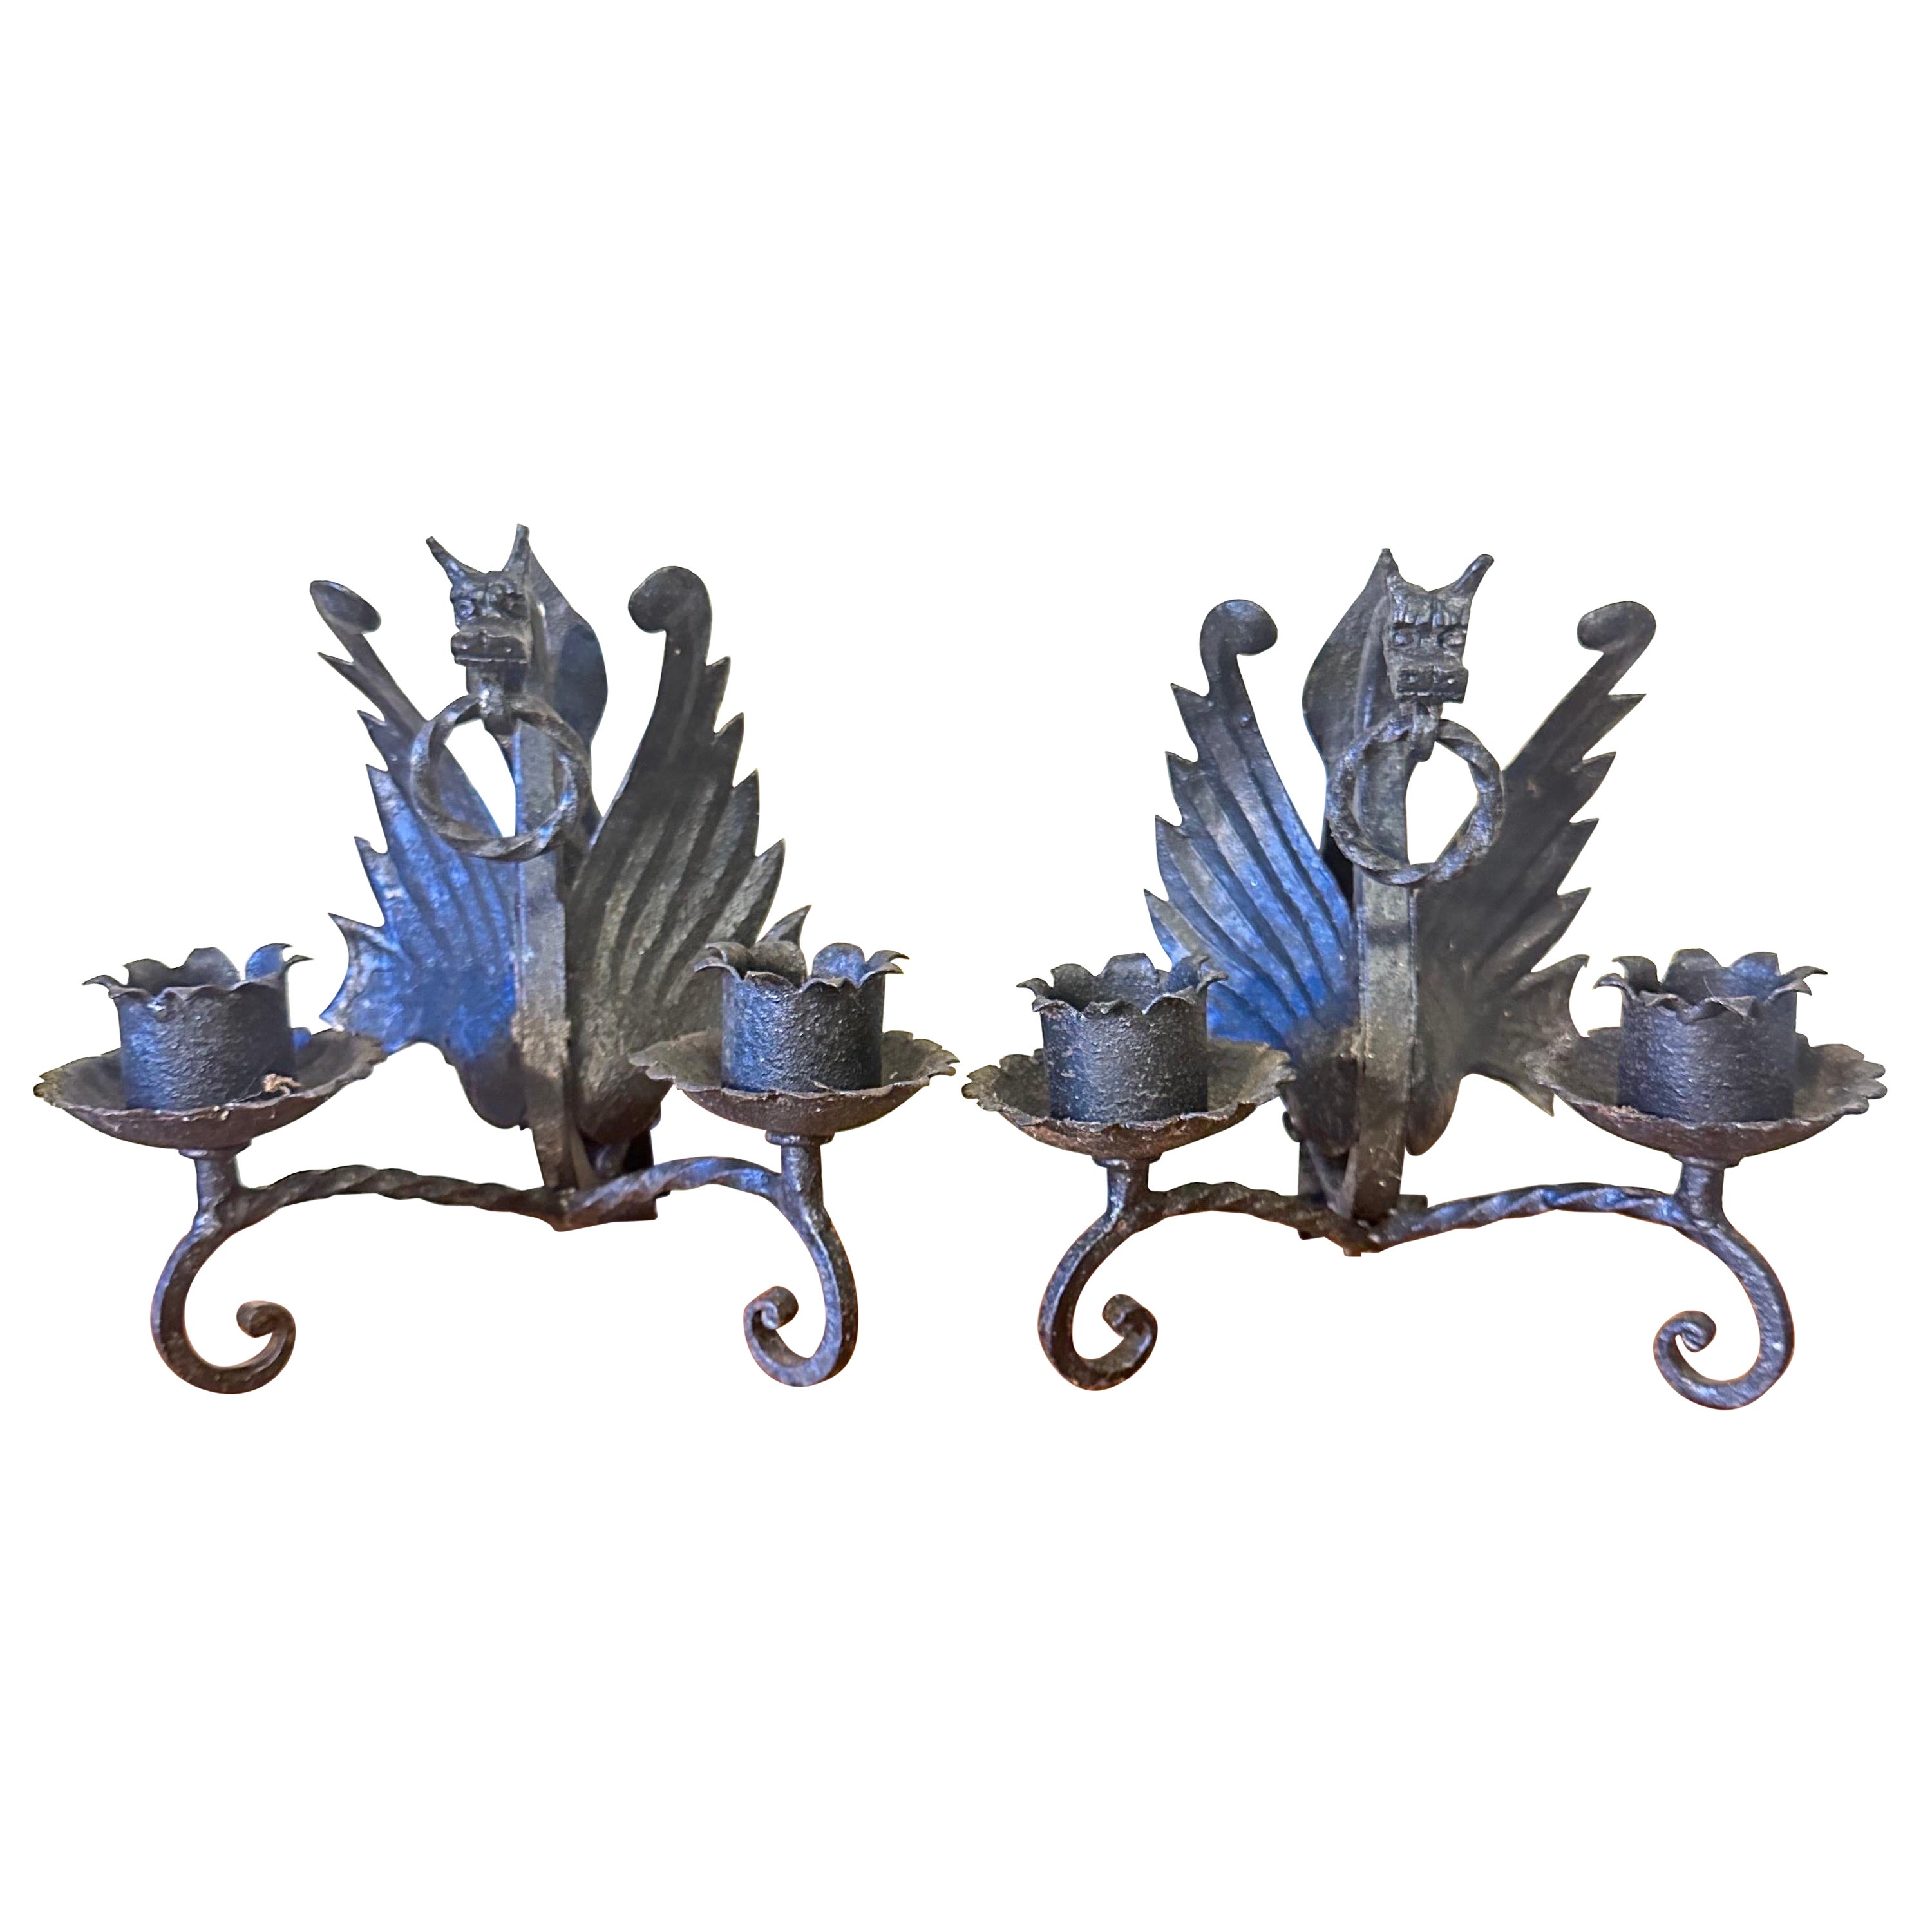 Medieval Antique winged dragon wrought iron sconces manner of Mazzucotelli